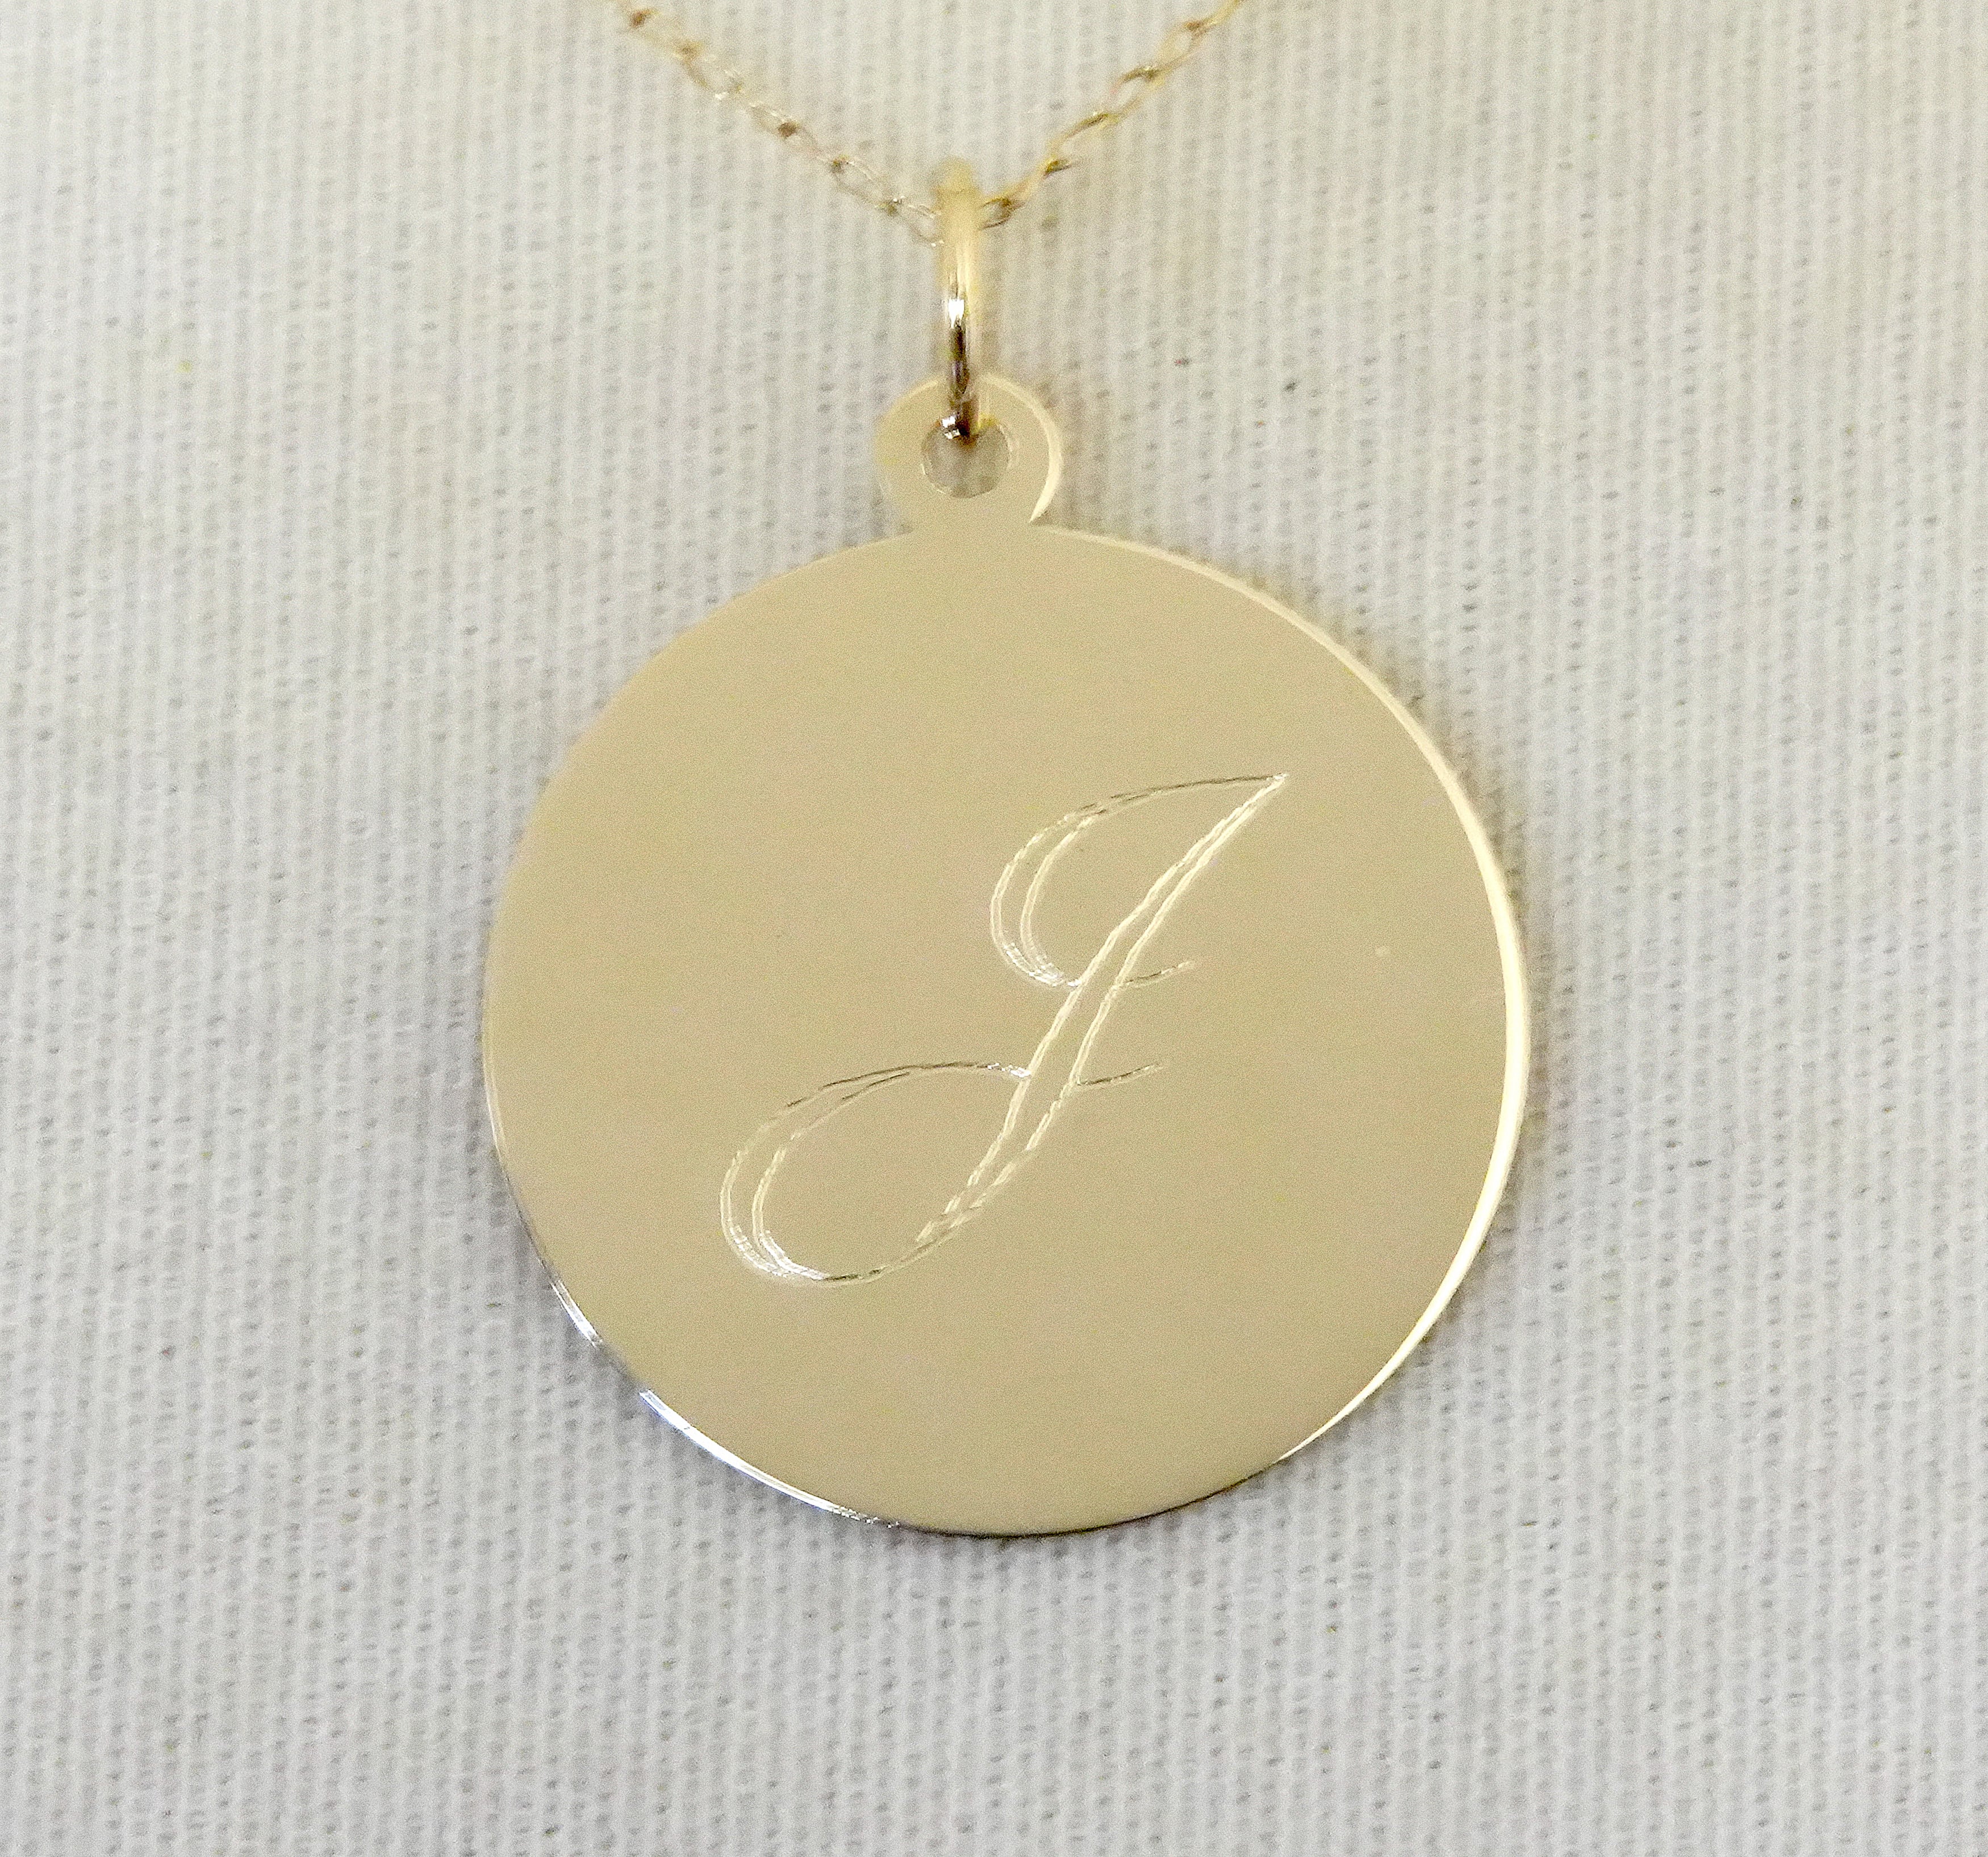 10k Yellow Gold 18mm Round Circle Disc Pendant Charm Personalized Monogram Engraved